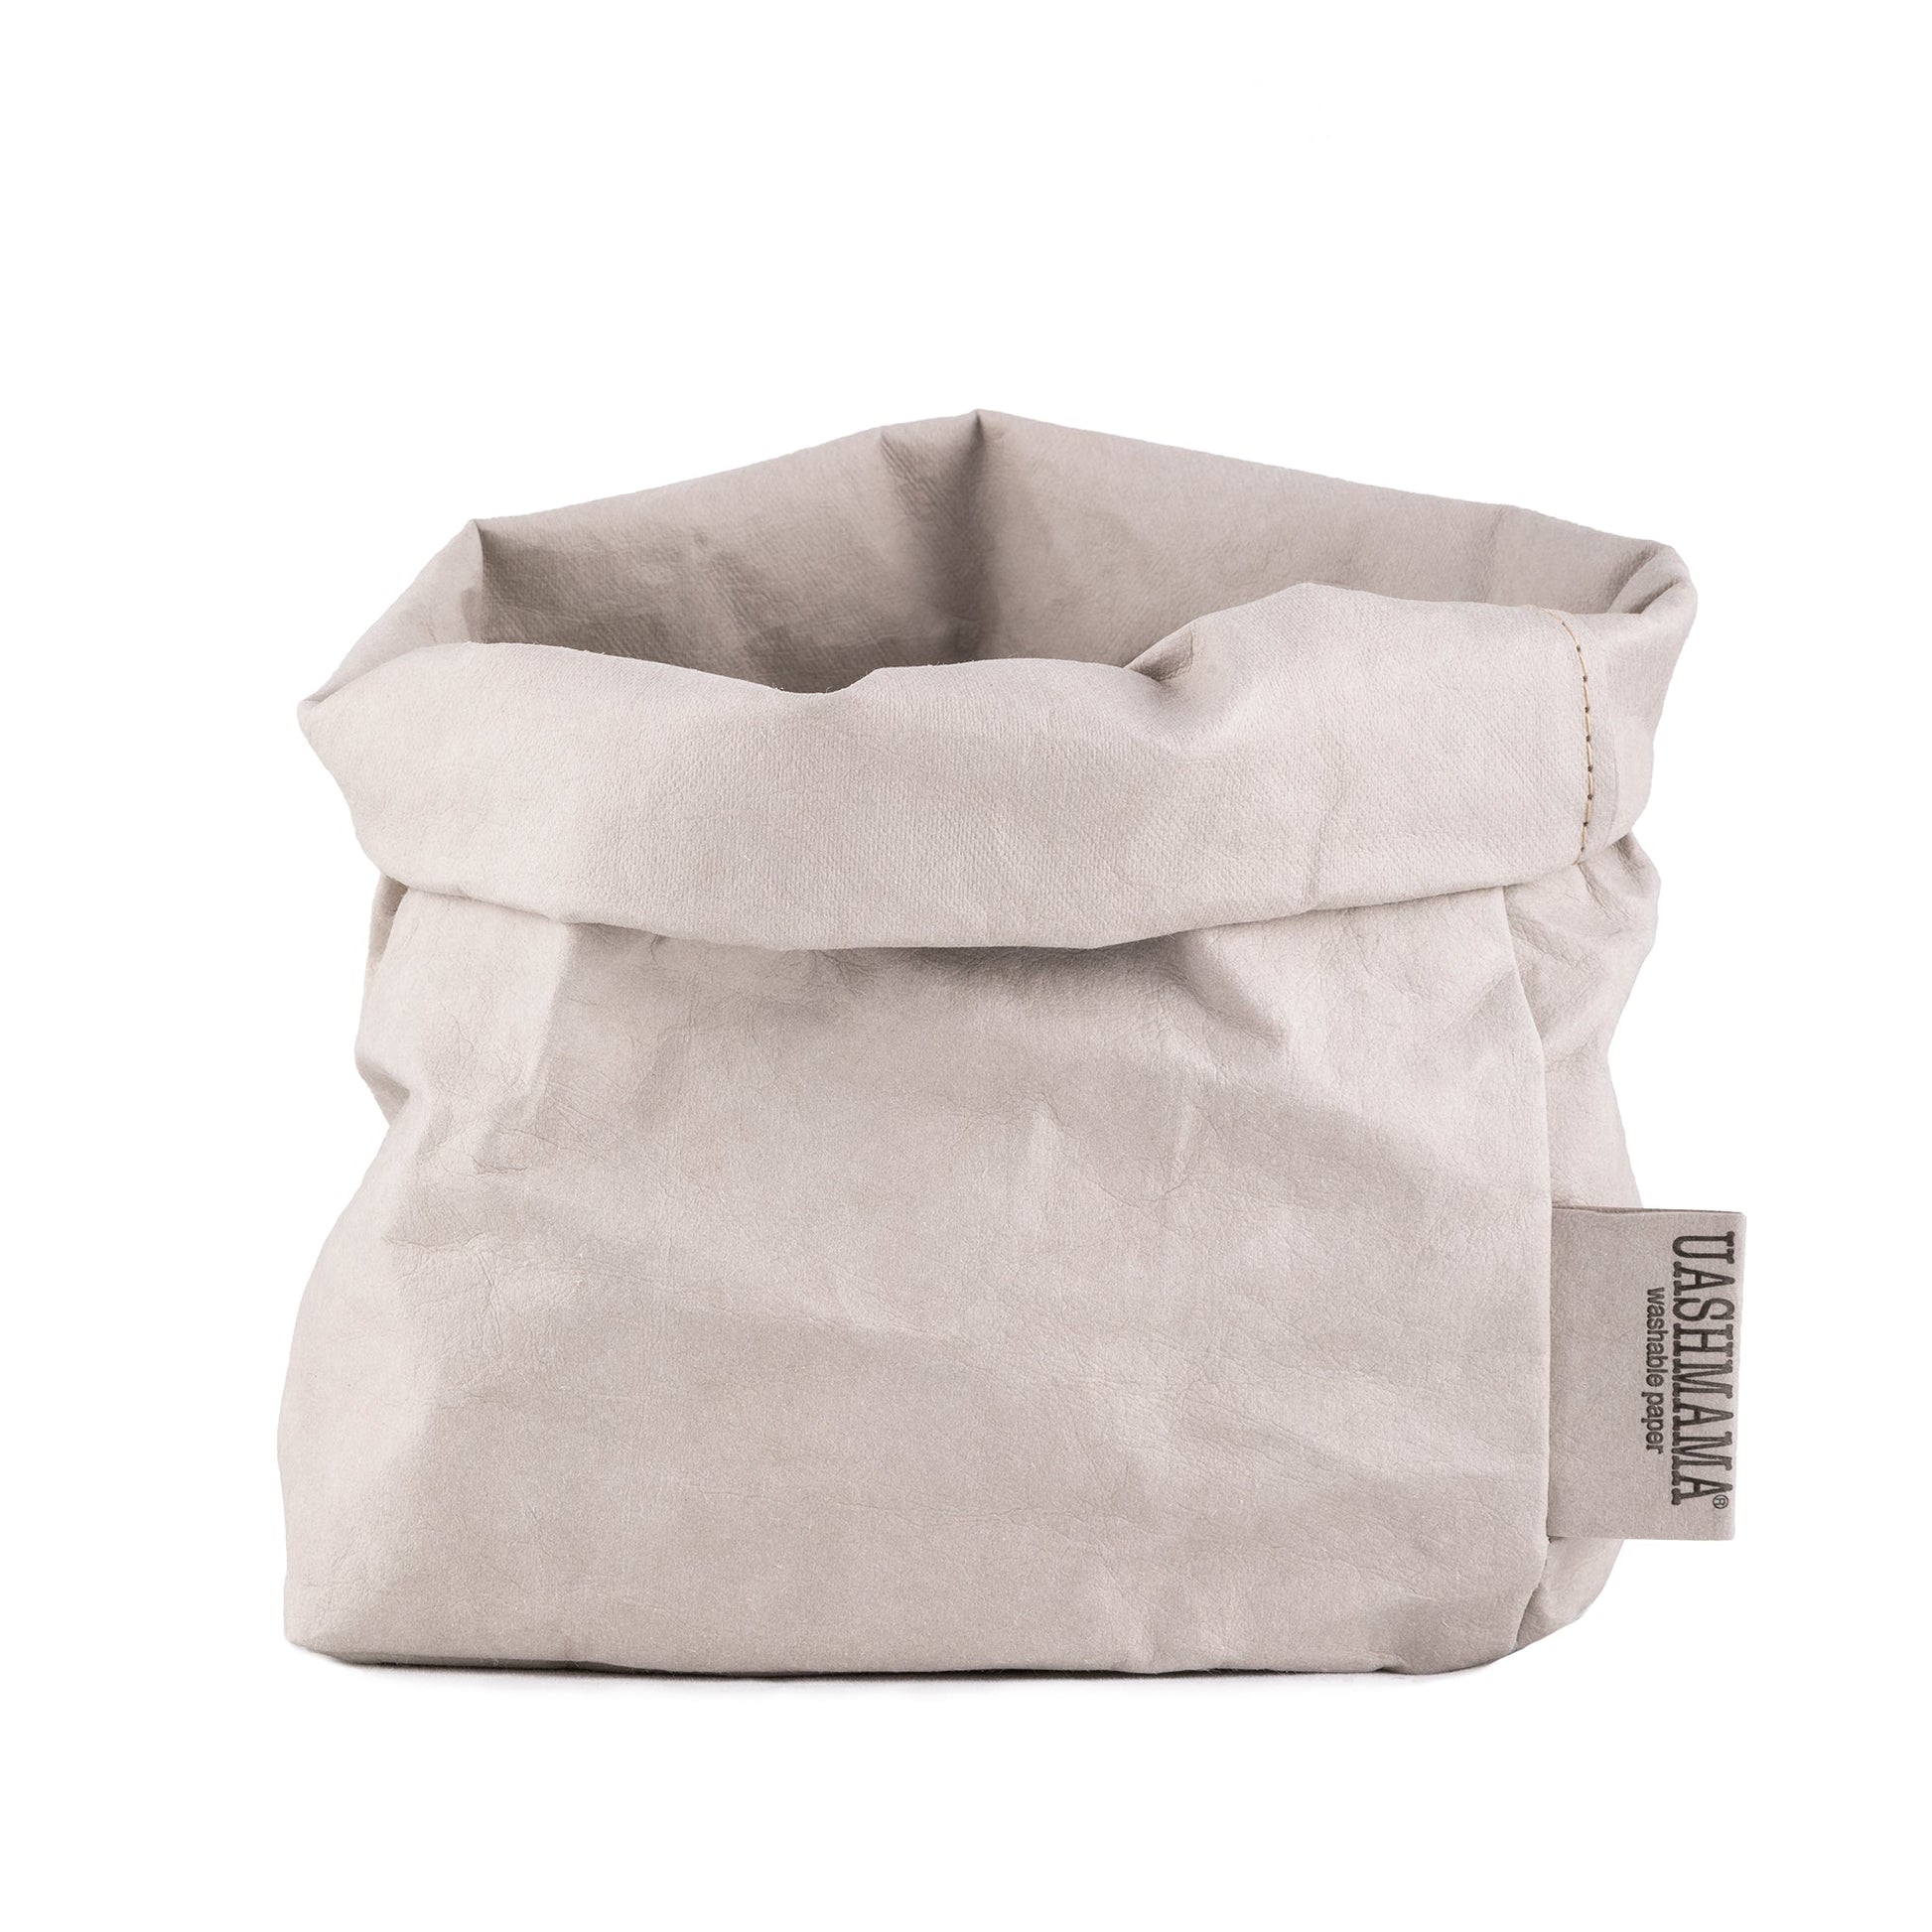 A washable paper bag is shown. The bag is rolled down at the top and features a UASHMAMA logo label on the bottom left corner. The bag pictured is the medium size in pale grey.